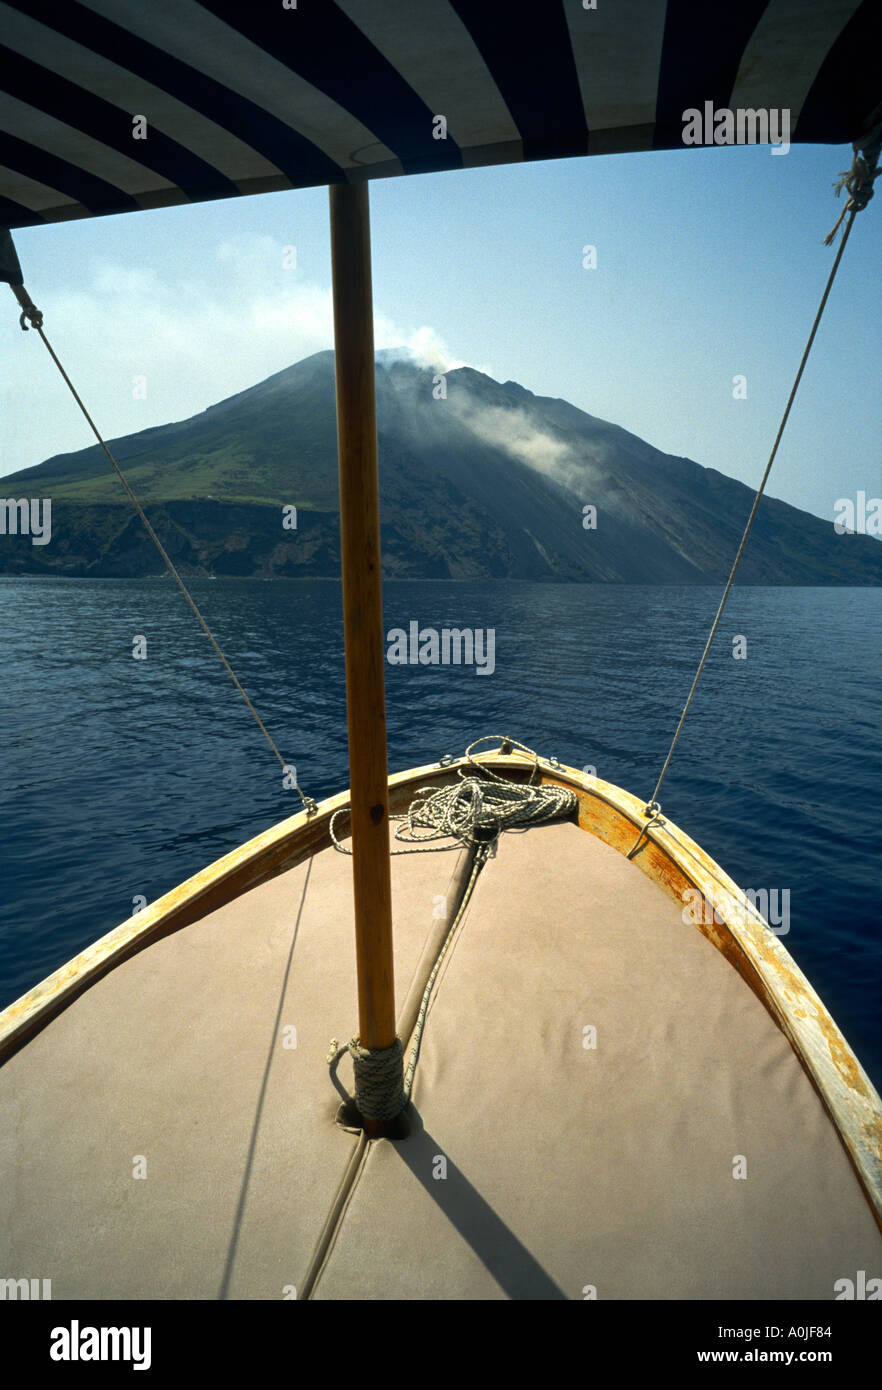 Italy Sicily Aeolie Stromboli View of the island showing the sciara del fuoco trail of fire Stock Photo